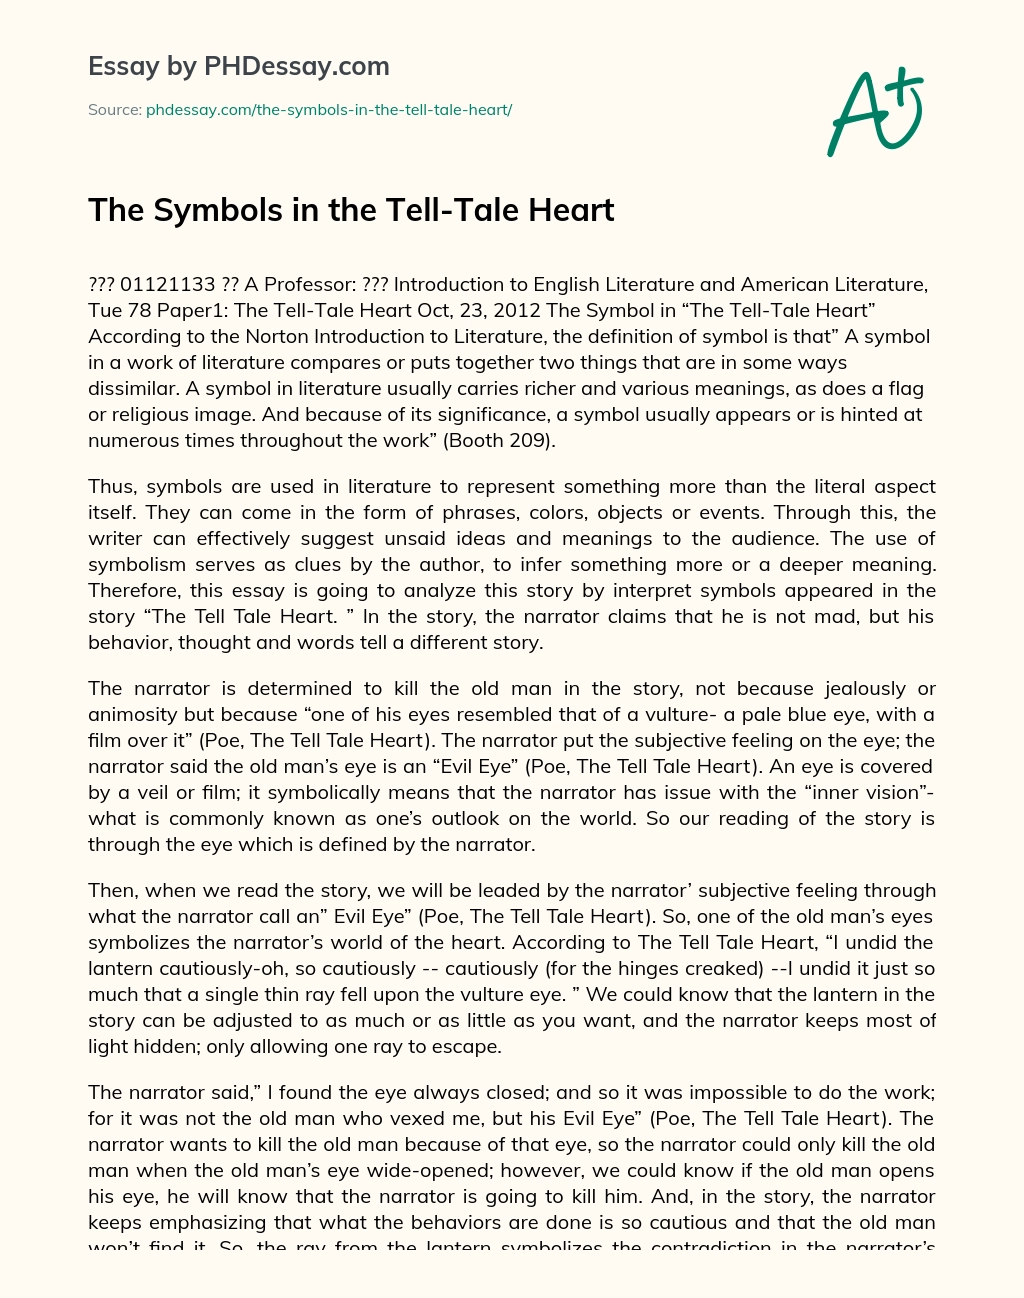 The Symbols in the Tell-Tale Heart essay